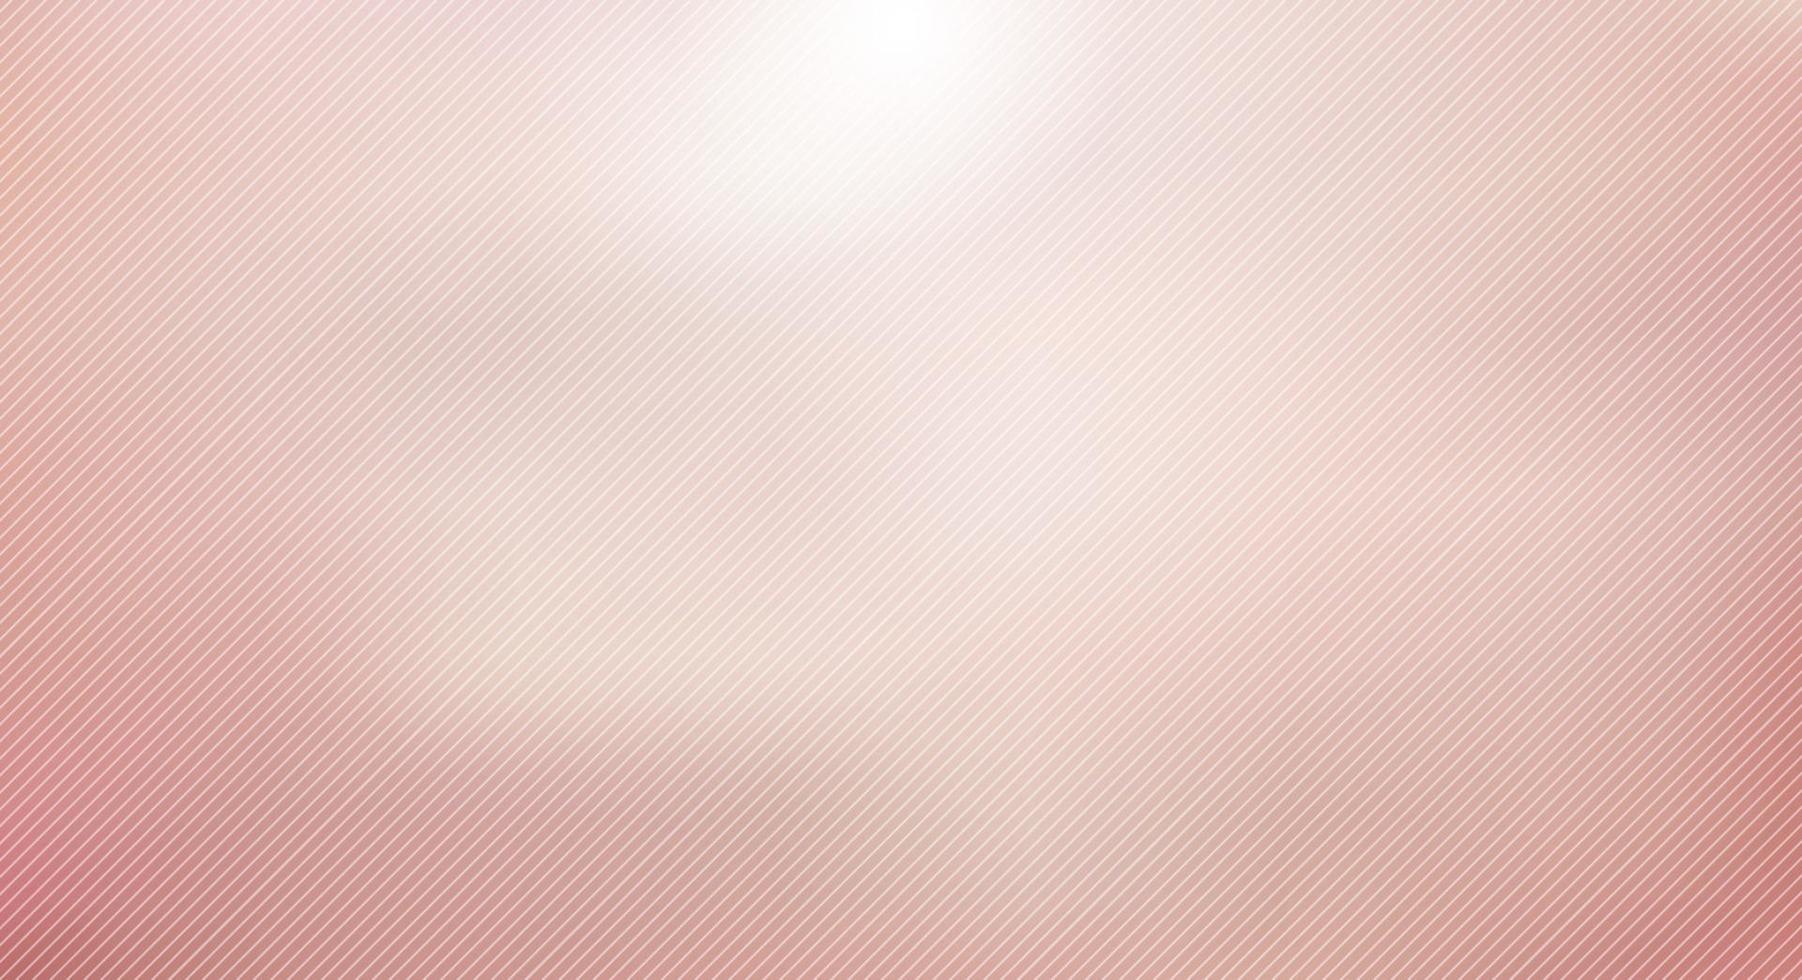 Abstract pink blurred background and lines diagonal texture with light. vector